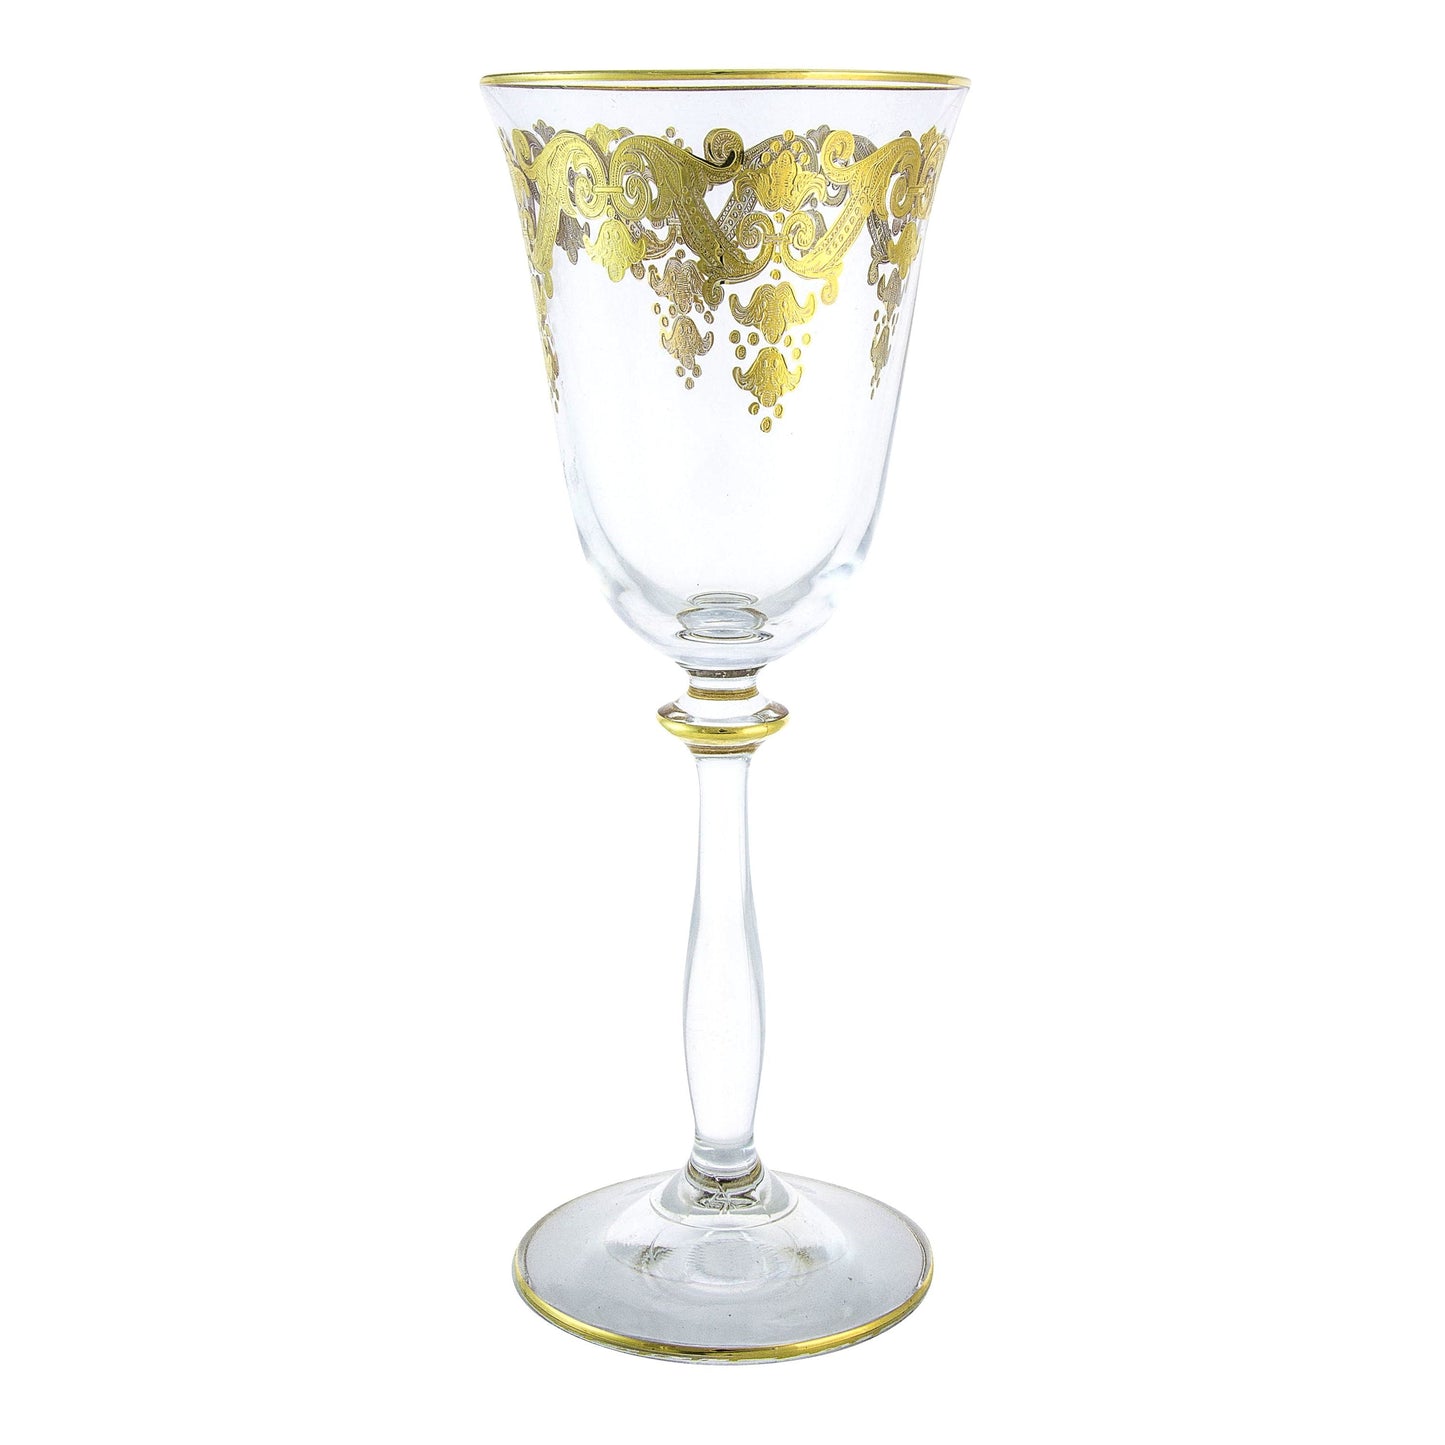 Classic Touch Decor Wine Glass, 24K Gold Artwork, Set of 6, 8"